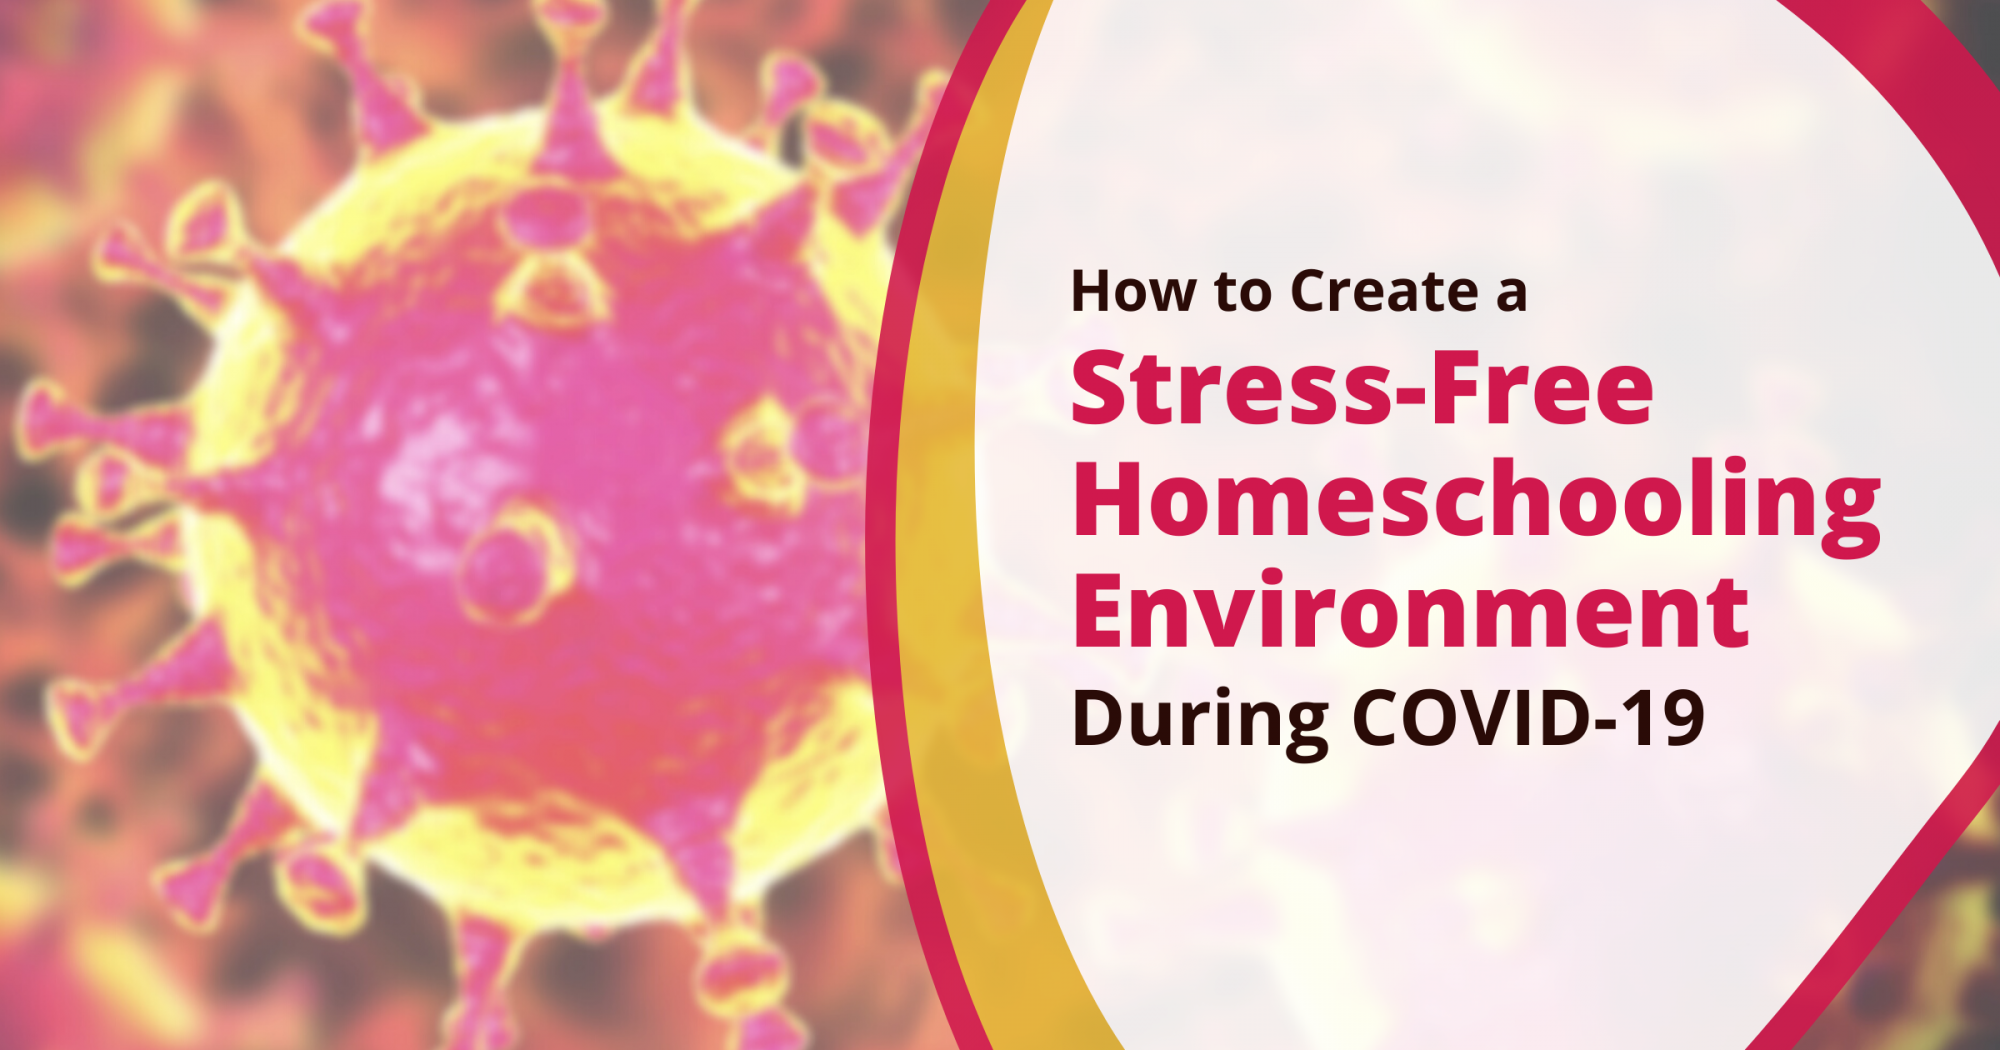 How to Create a Stress-Free Homeschool Experience During COVID-19